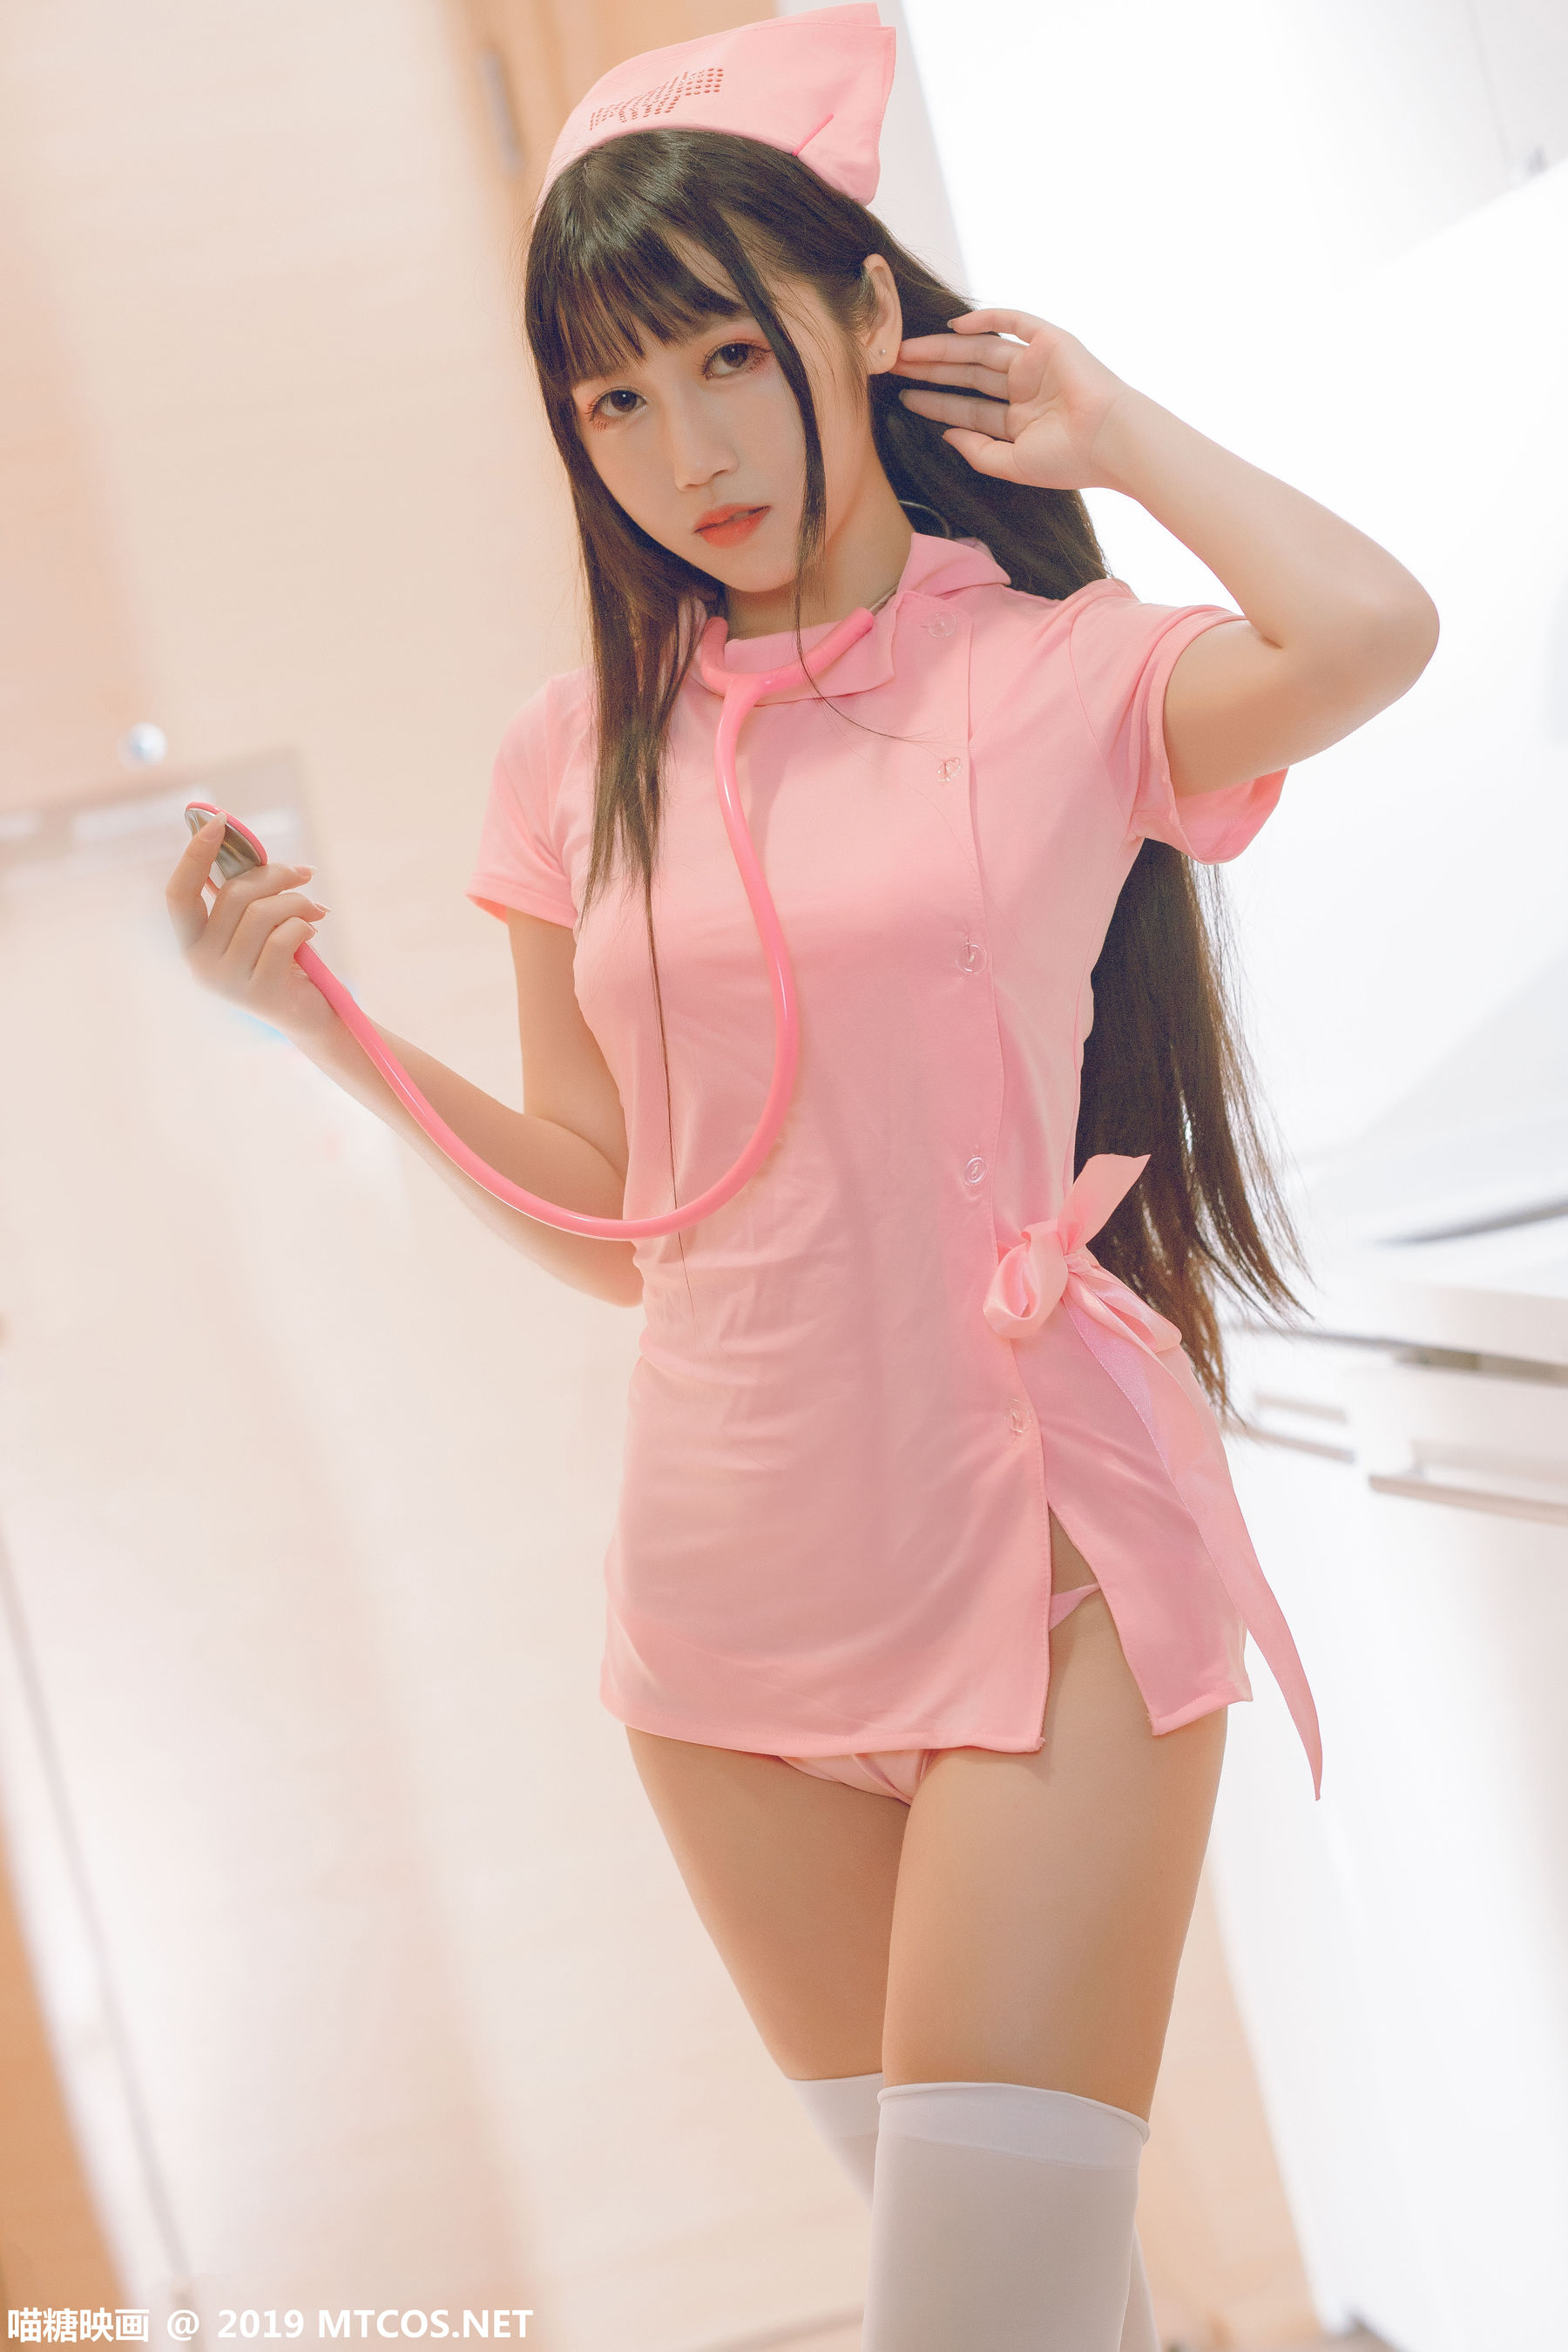 “You may have a disease that likes me” [糖] Vol.072 photo set